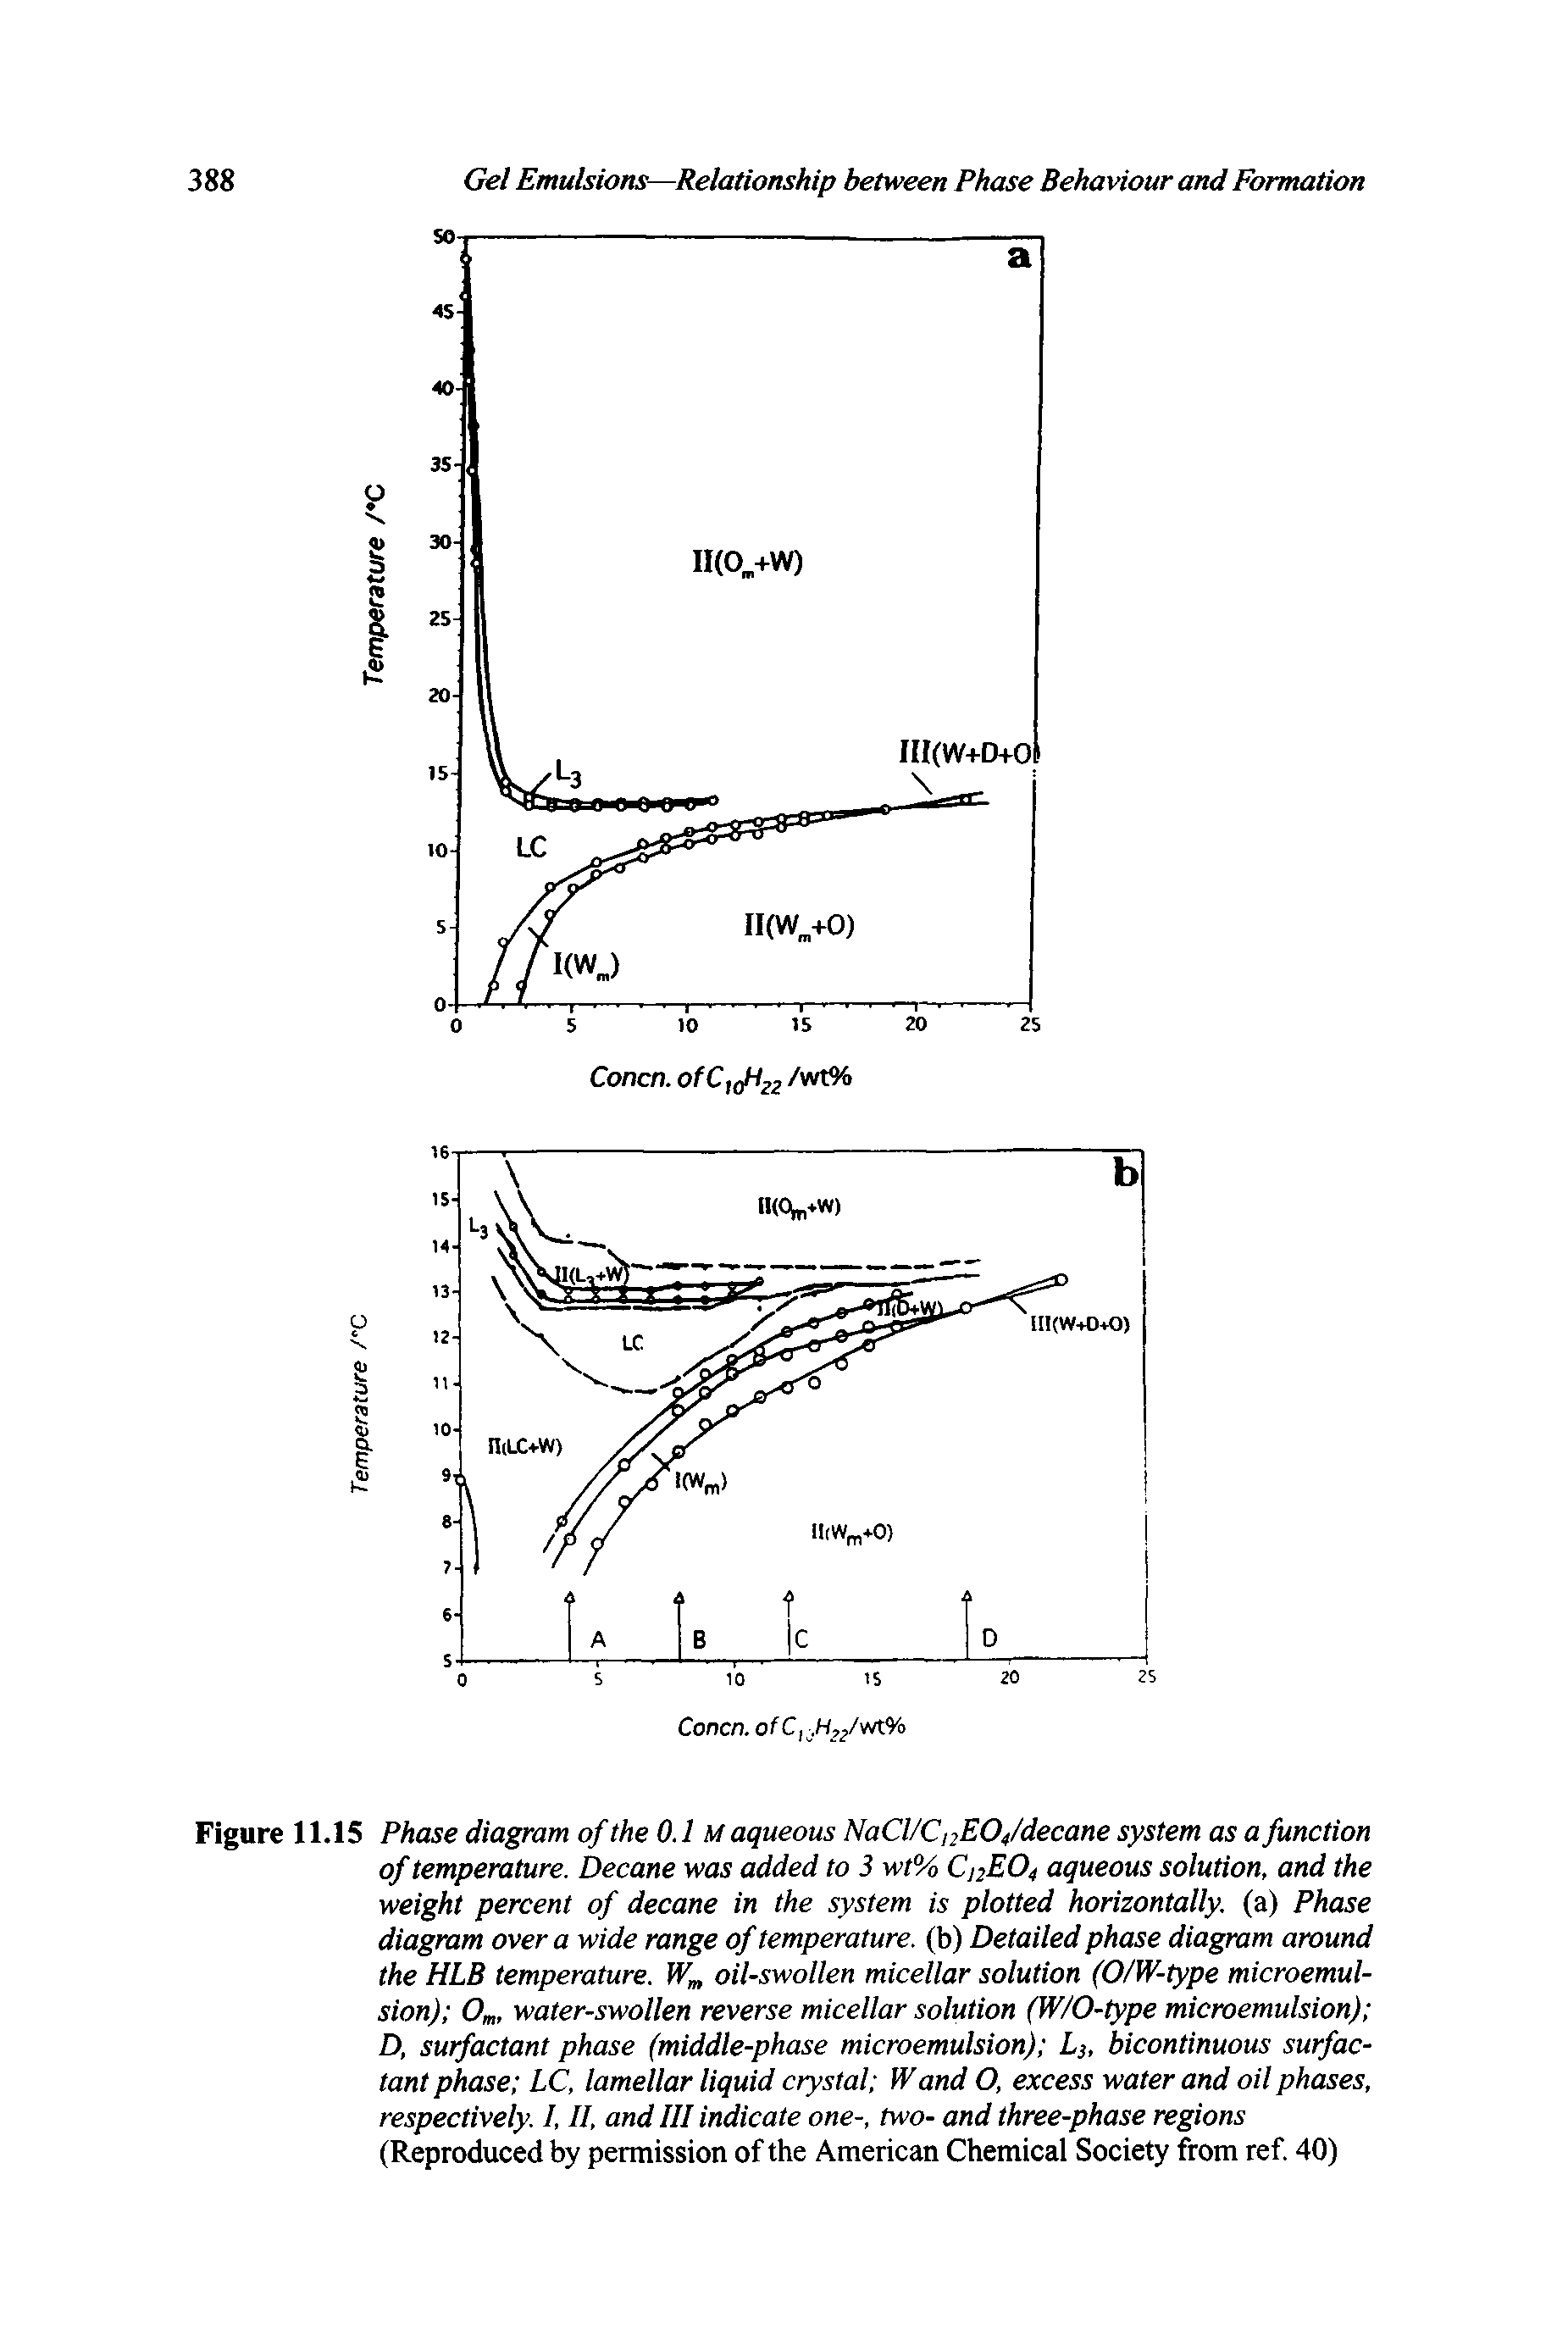 Figure 11.15 Phase diagram of the 0.1 M aqueous NaCl/CnEOfdecane system as a function of temperature. Decane was added to 3 wt% C12EO4 aqueous solution, and the weight percent of decane in the system is plotted horizontally, (a) Phase diagram over a wide range of temperature, (b) Detailed phase diagram around the HLB temperature. W oil-swollen micellar solution (0/W-type microemulsion) Om, water-swollen reverse micellar solution (W/O-type microemulsion) D, surfactant phase (middle-phase microemulsion) L3, bicontinuous surfactant phase LC, lamellar liquid crystal Wand O, excess water and oil phases, respectively. I, II, and III indicate one-, two- and three-phase regions (Reproduced by permission of the American Chemical Society from ref 40)...